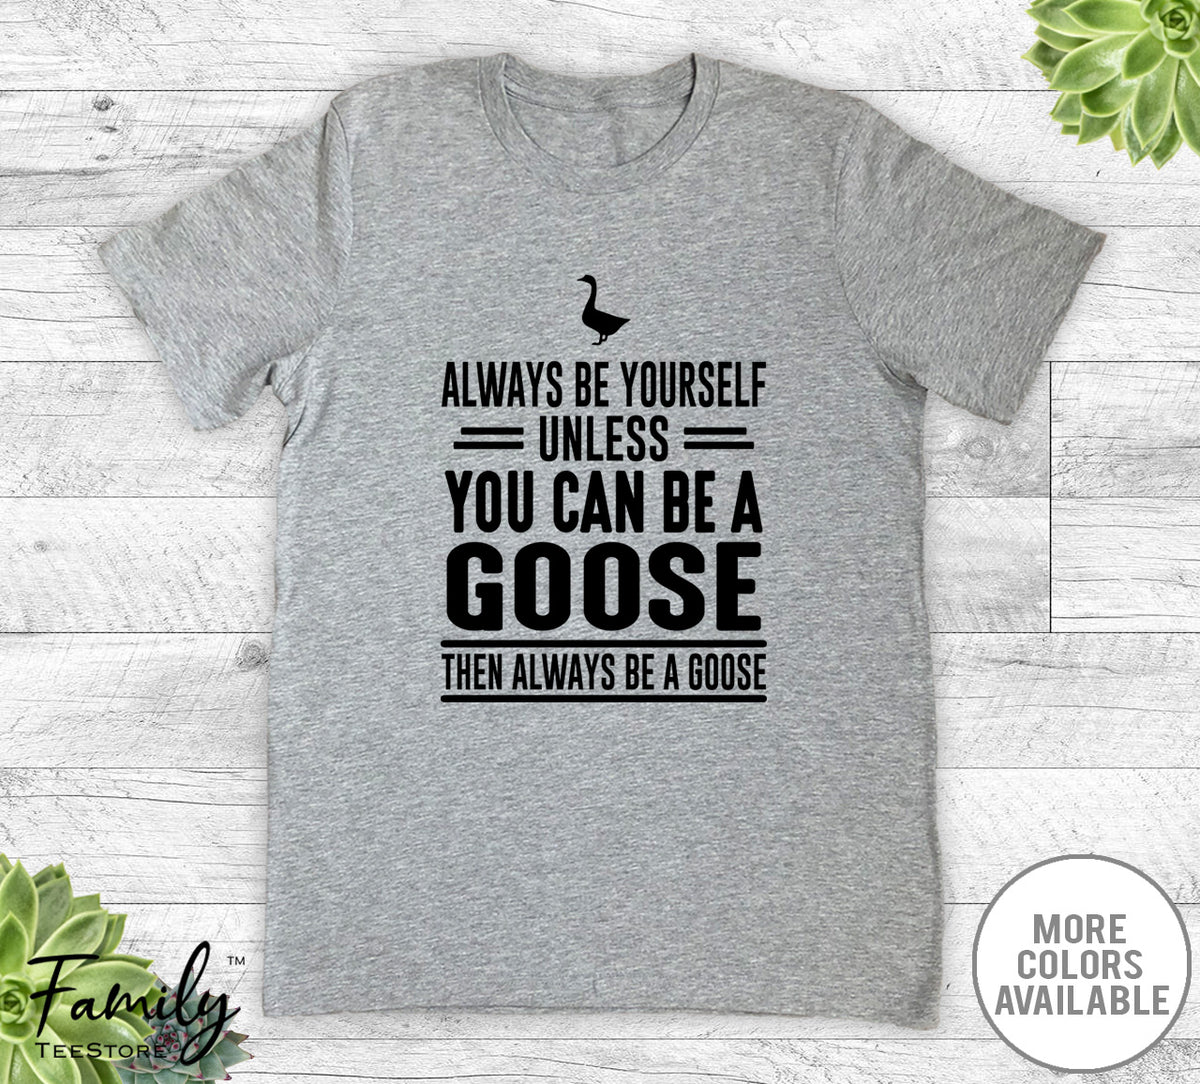 Always Be Yourself Unless You Can Be A Goose - Unisex T-shirt - Goose Shirt - Goose Gift - familyteeprints